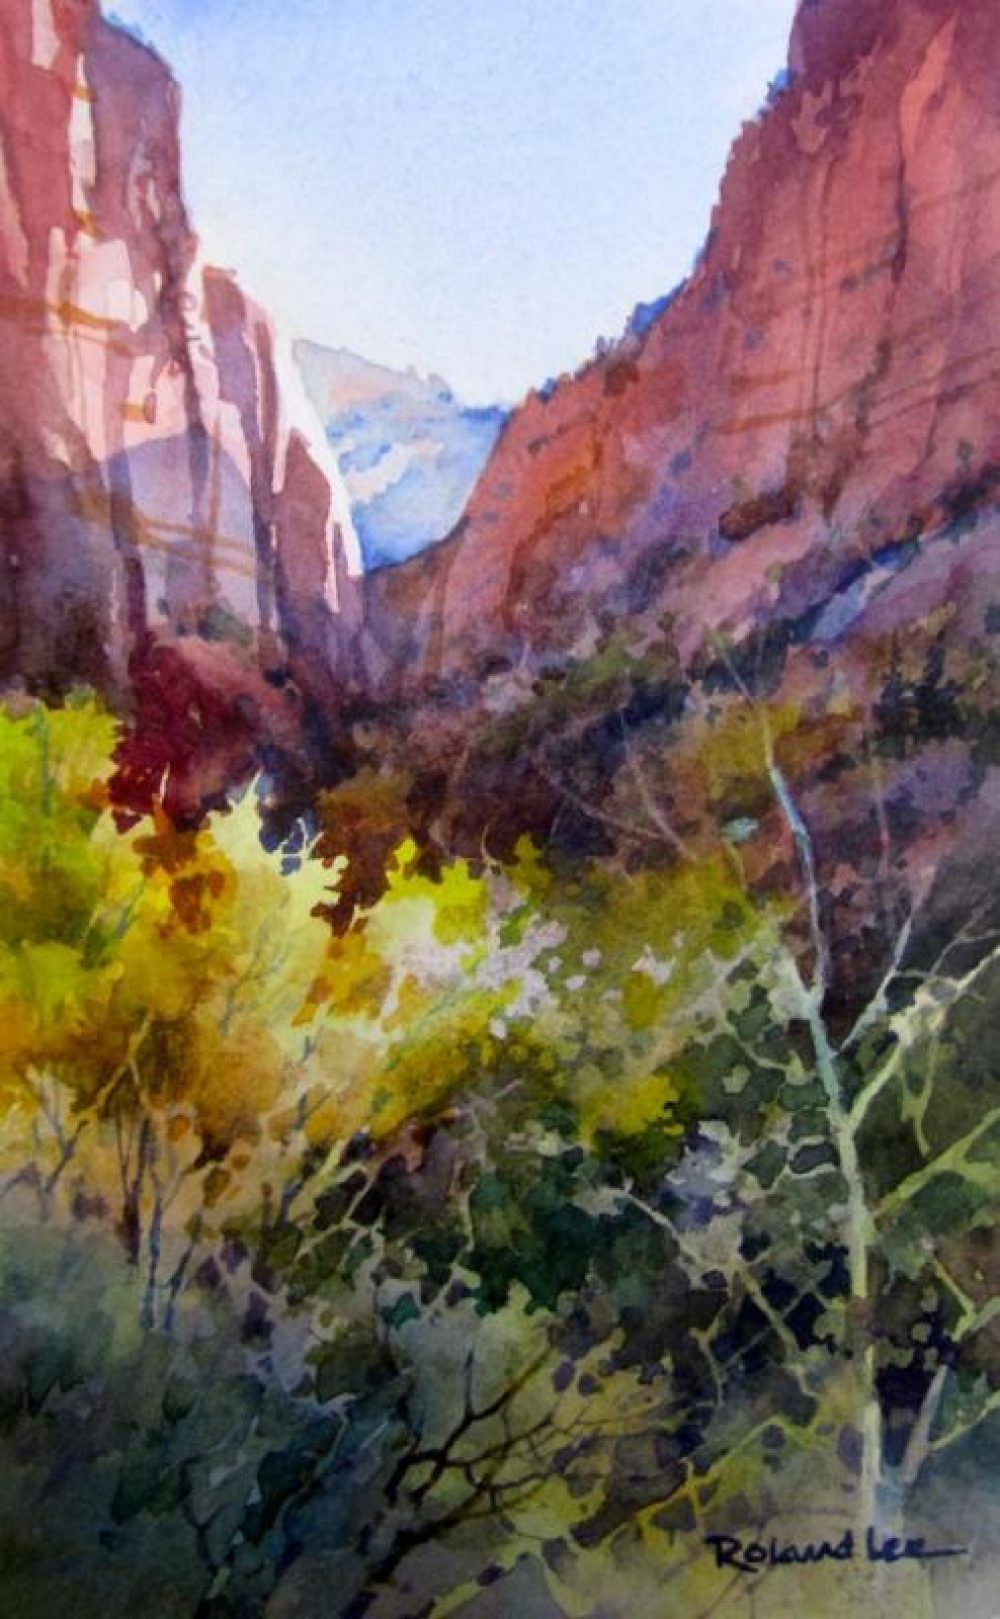 Kolob Golden Leaves - Original watercolor painting of Kolob Fingers area of Zion National Park